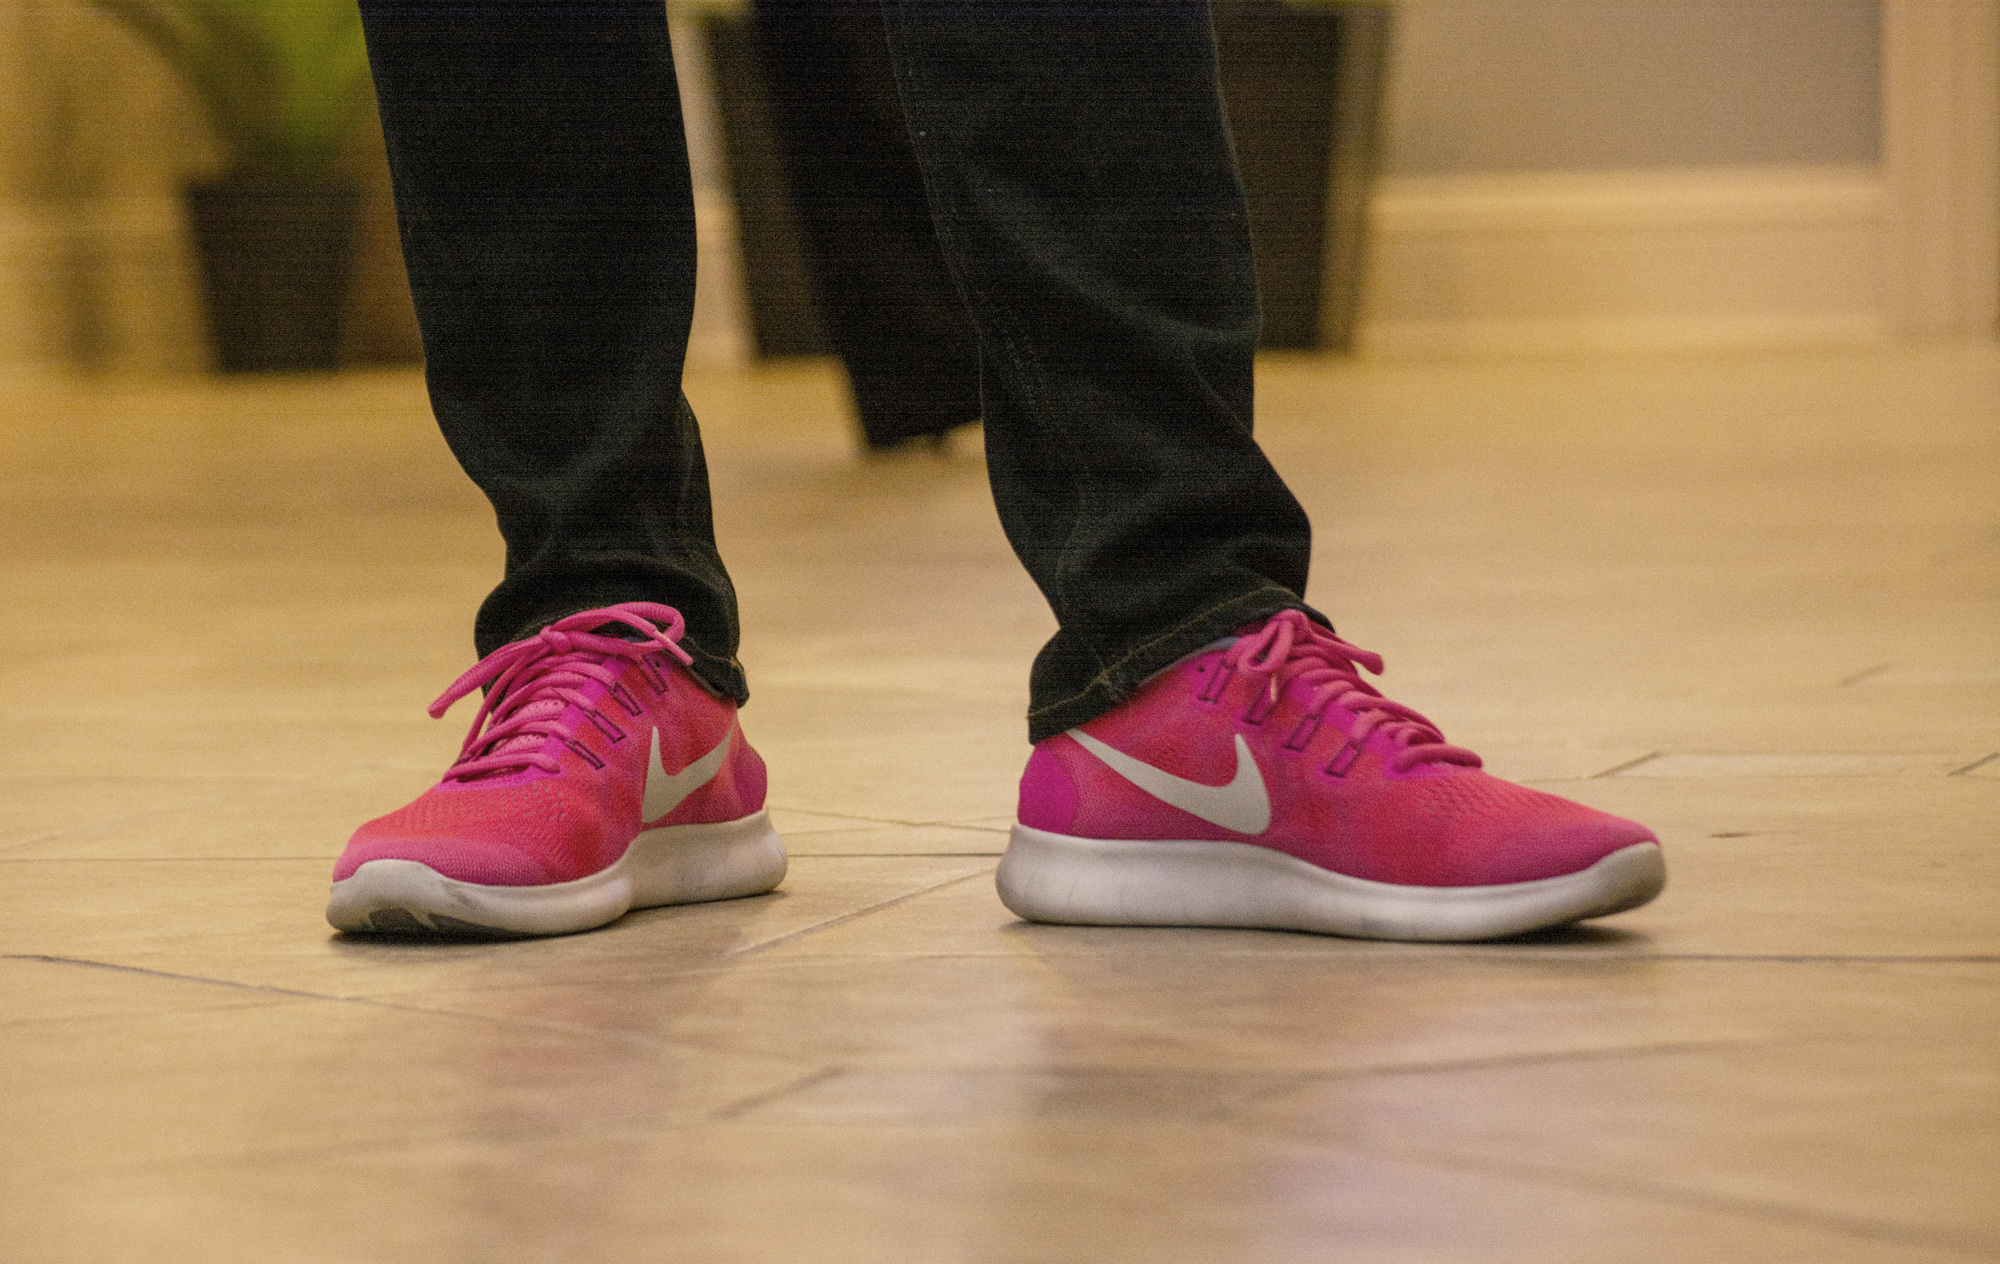 Anne Patterson wears a pair of bright pink Nike's during the unveiling of her latest piece entitled 